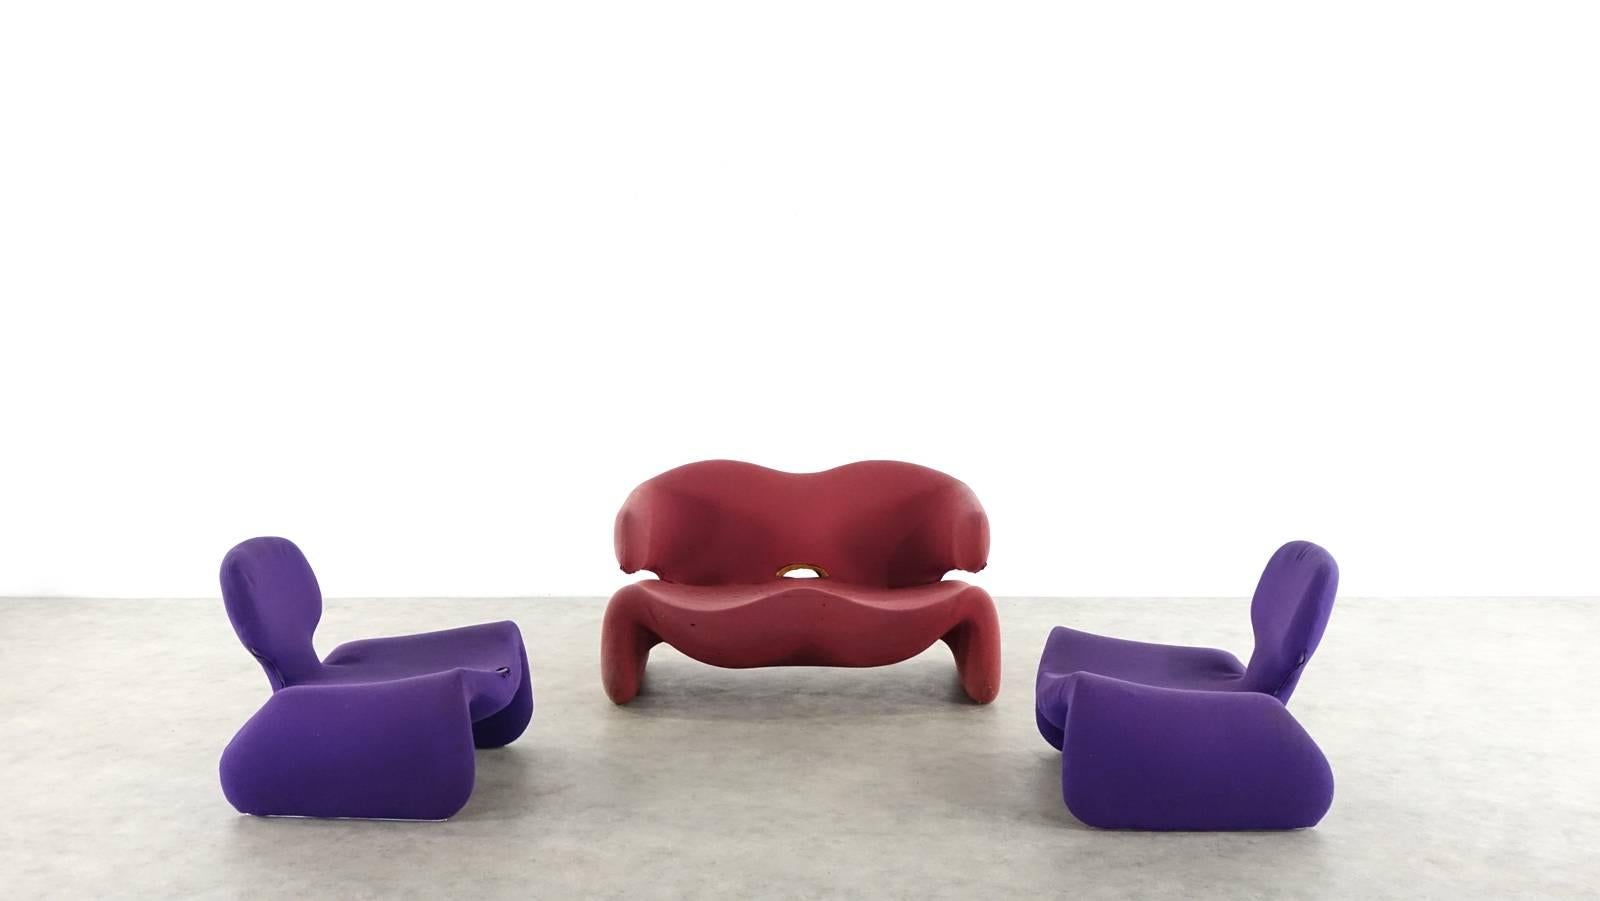 Airborne Djinn Seating Group Design Olivier Mourgue Stanley Kubrick Odysse, 2001 In Distressed Condition In Munster, NRW